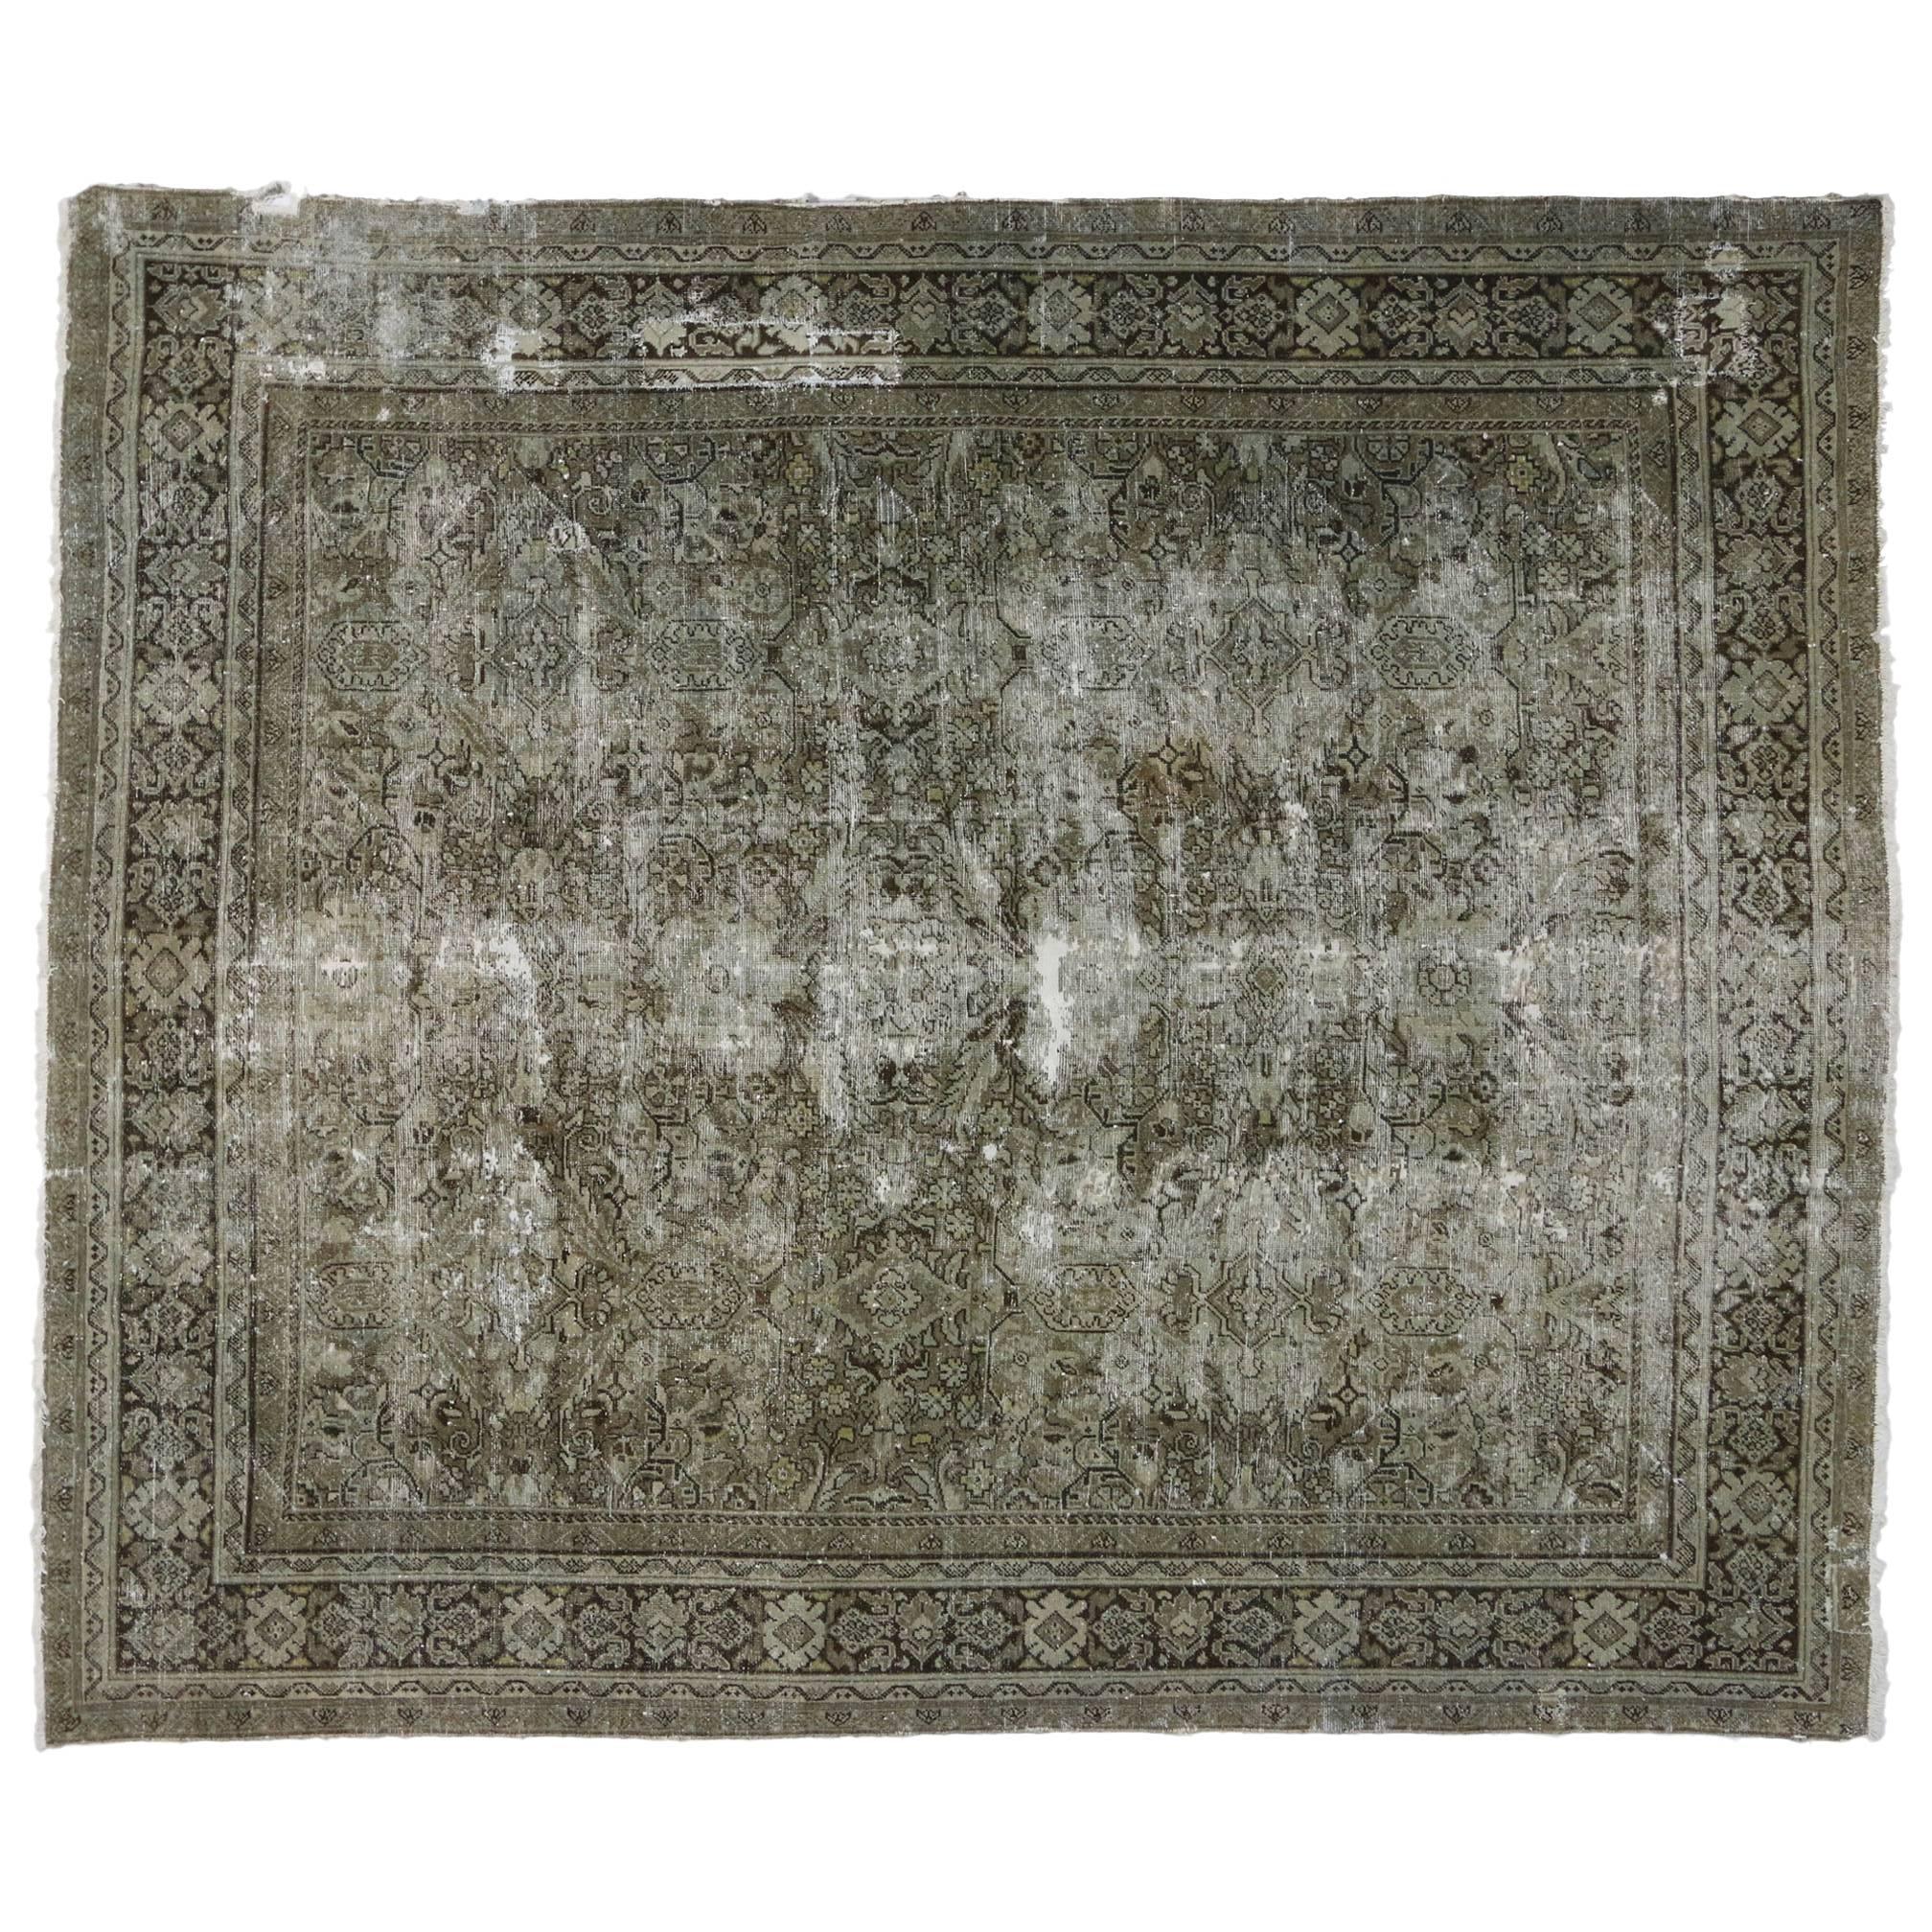 Antique-Worn Persian Mahal Rug, Relaxed Refinement Meets Earth-Tone Elegance 3